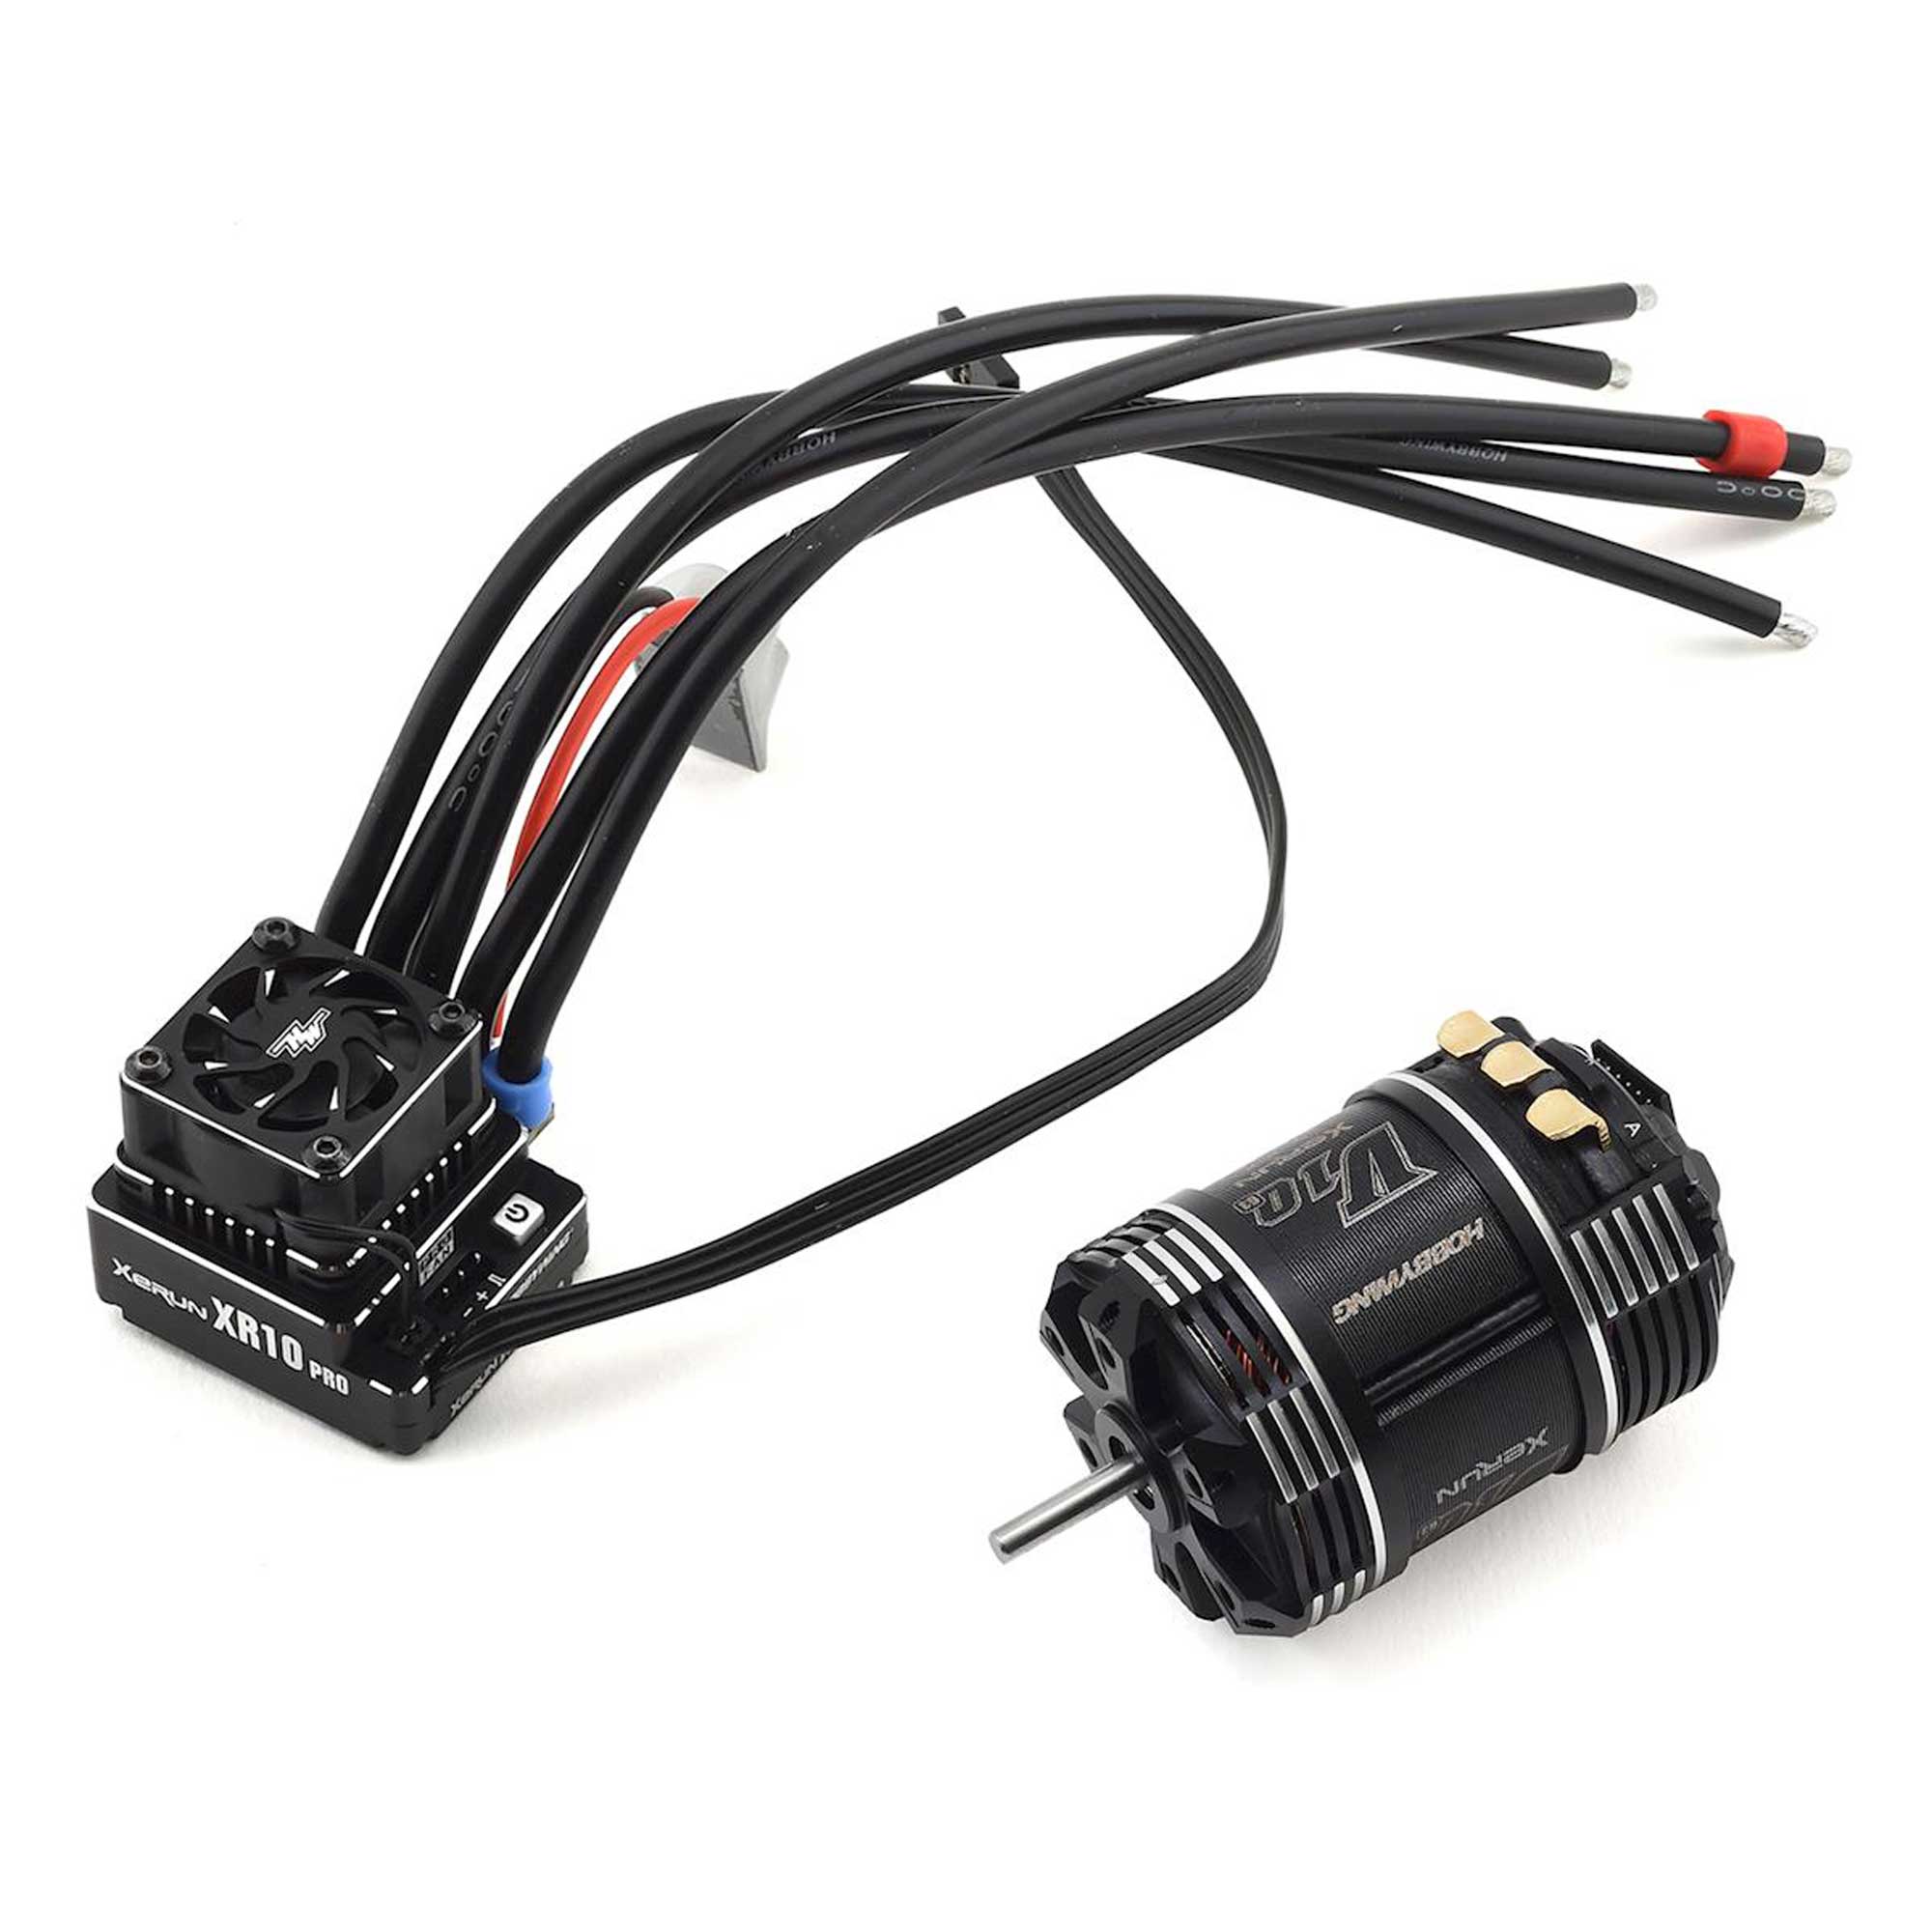 Hobbywing XR10 Pro Sensored Brushless ESC/V10 G3 Motor Combo for 1/10 Off-Road top 13.5T Class Competition